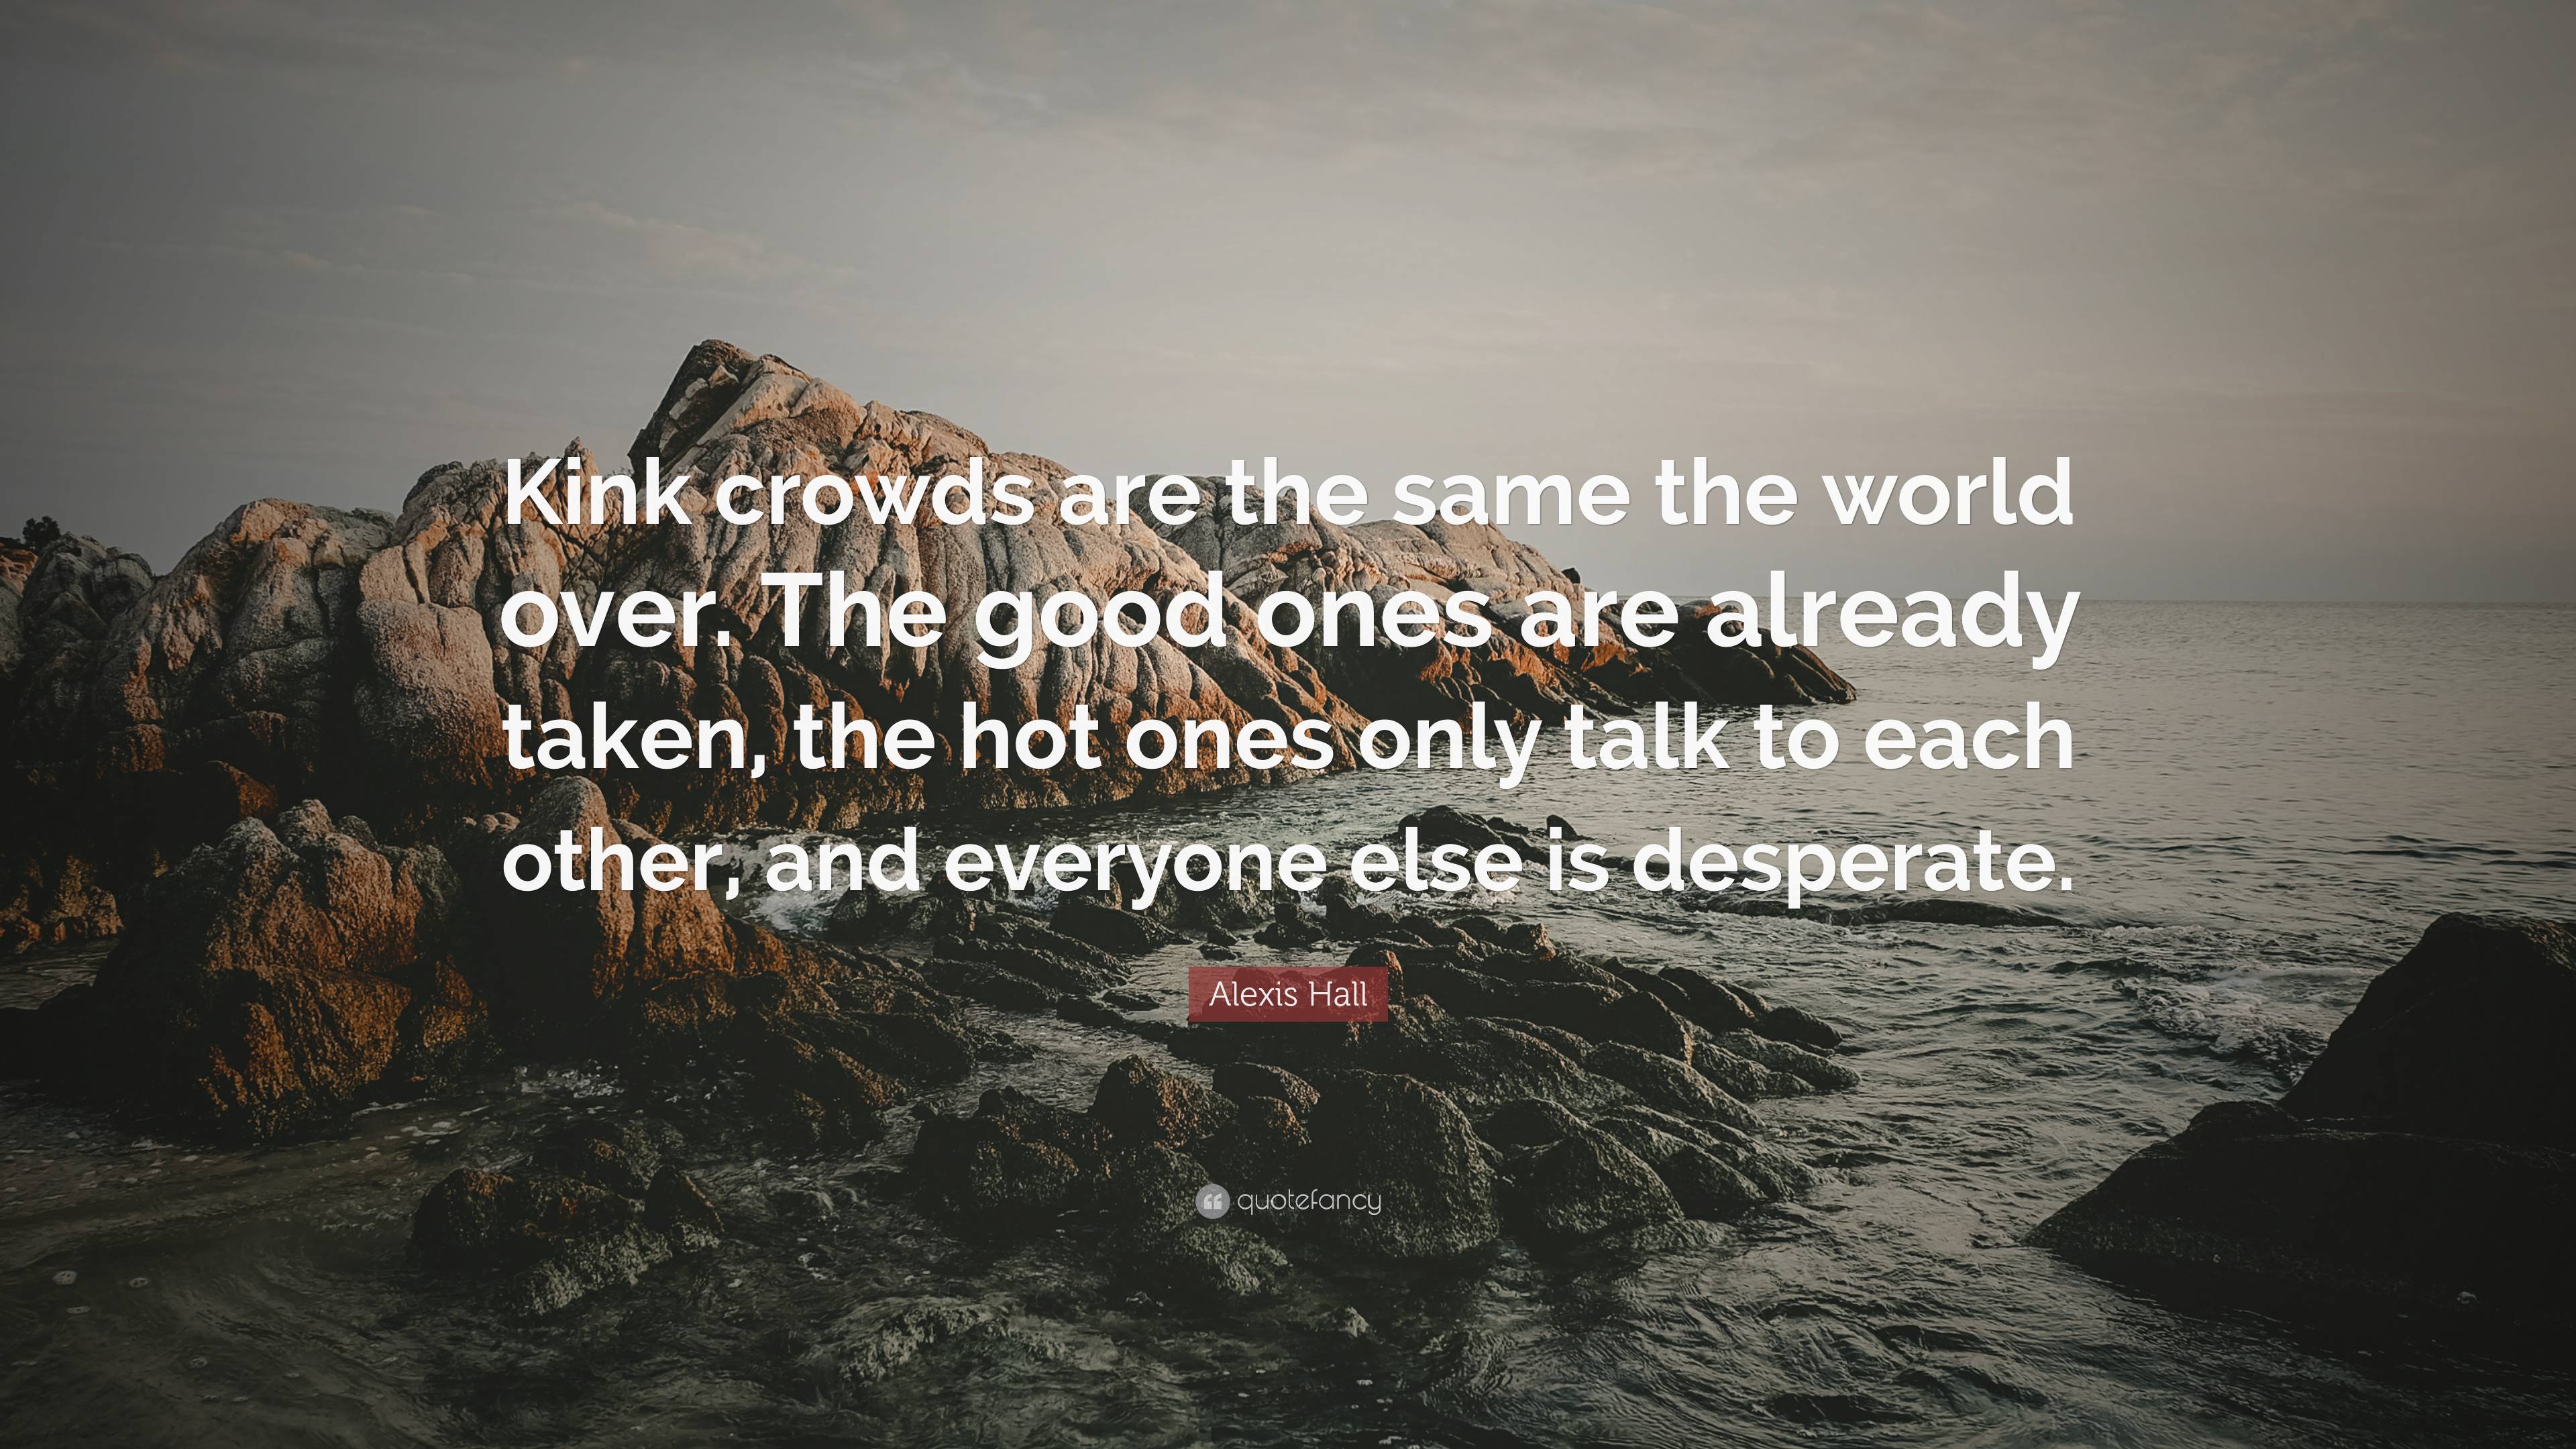 Alexis Hall Quote: “Kink crowds are the same the world over. The good ...